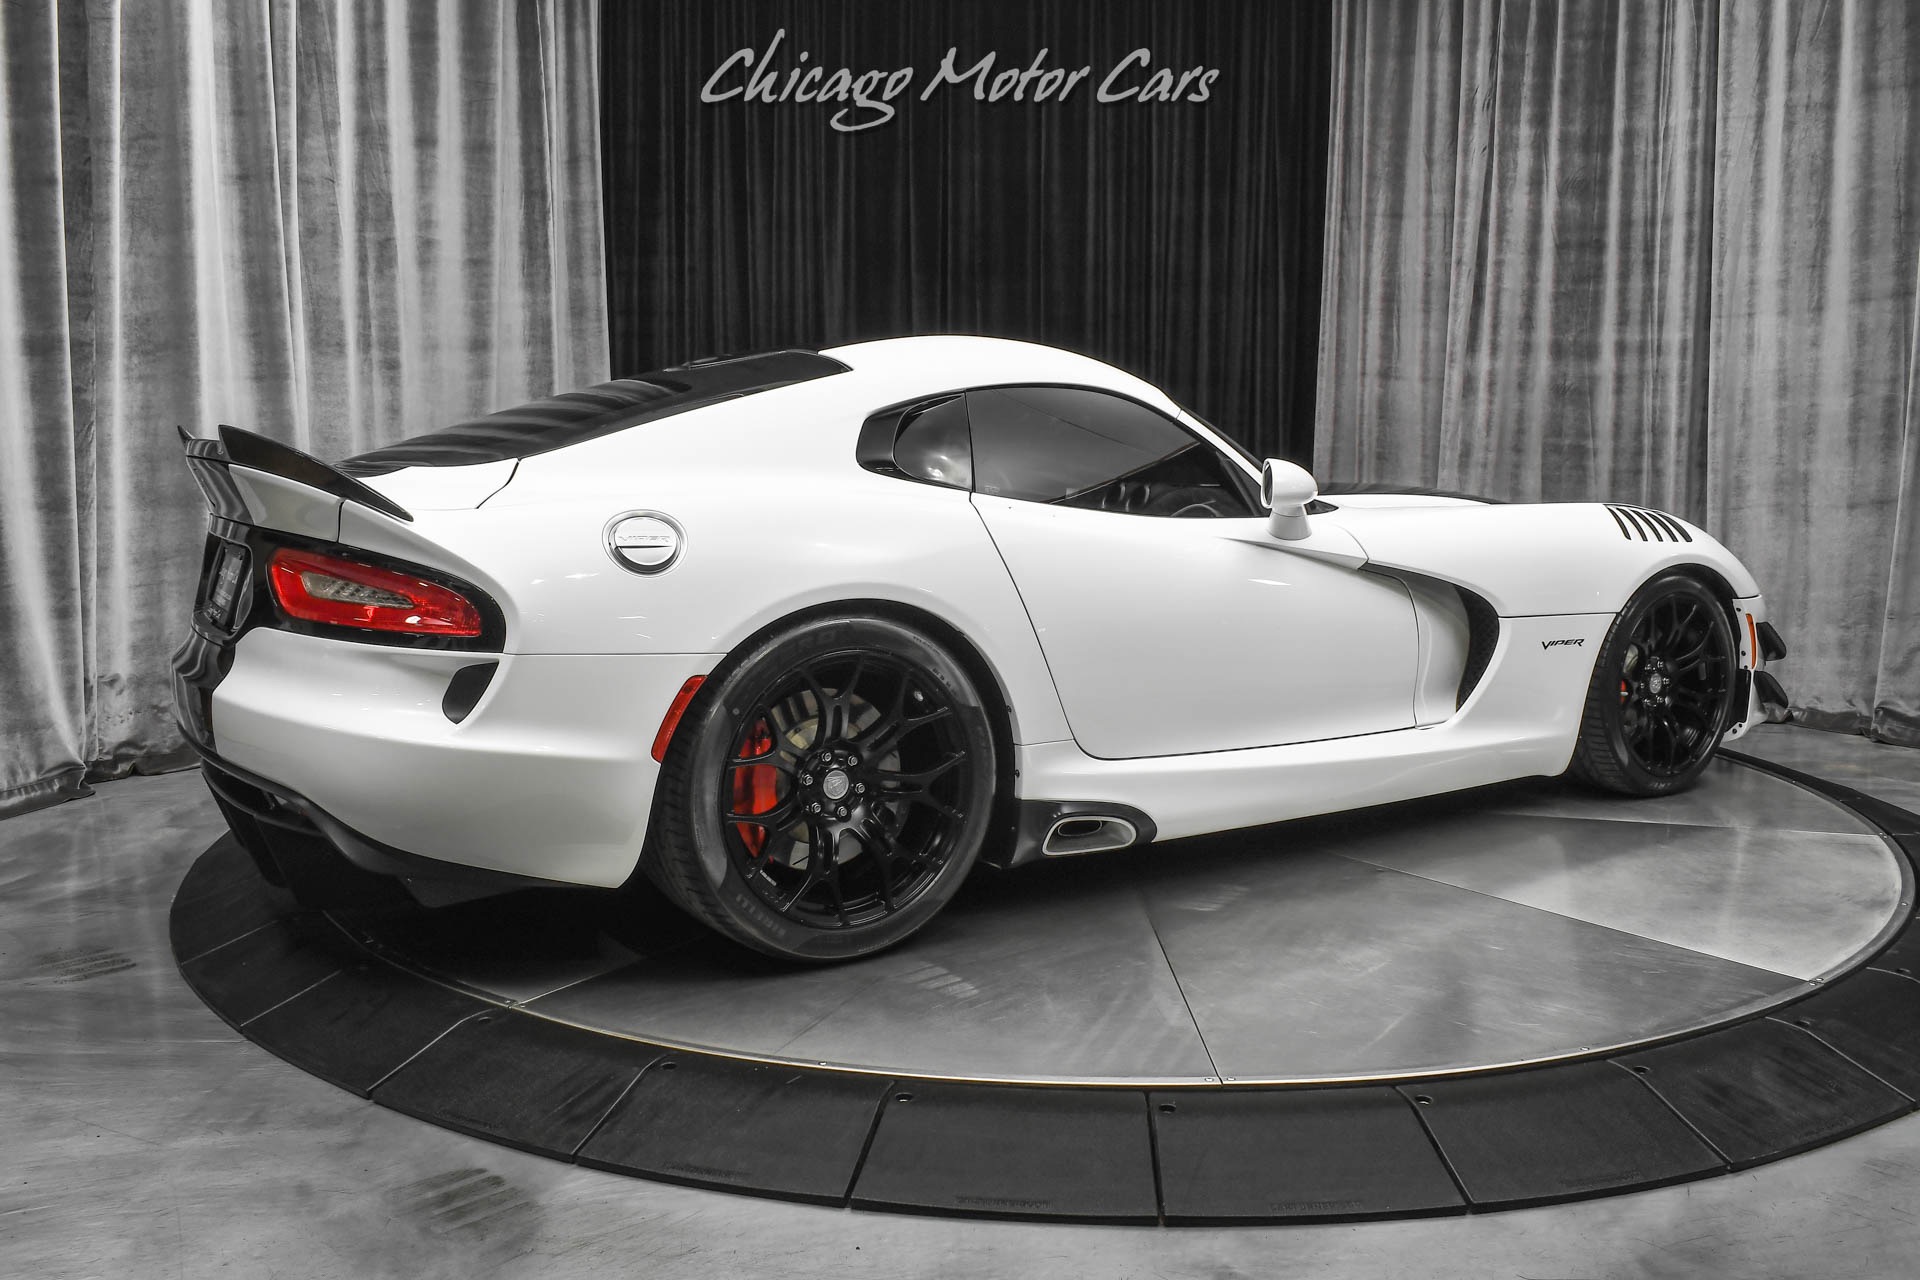 Used-2014-Dodge-Viper-GTS-Coupe-LOW-Miles-SRT-Audio-Carbon-Fiber-ACR-Hood--Diffuser-LOADED